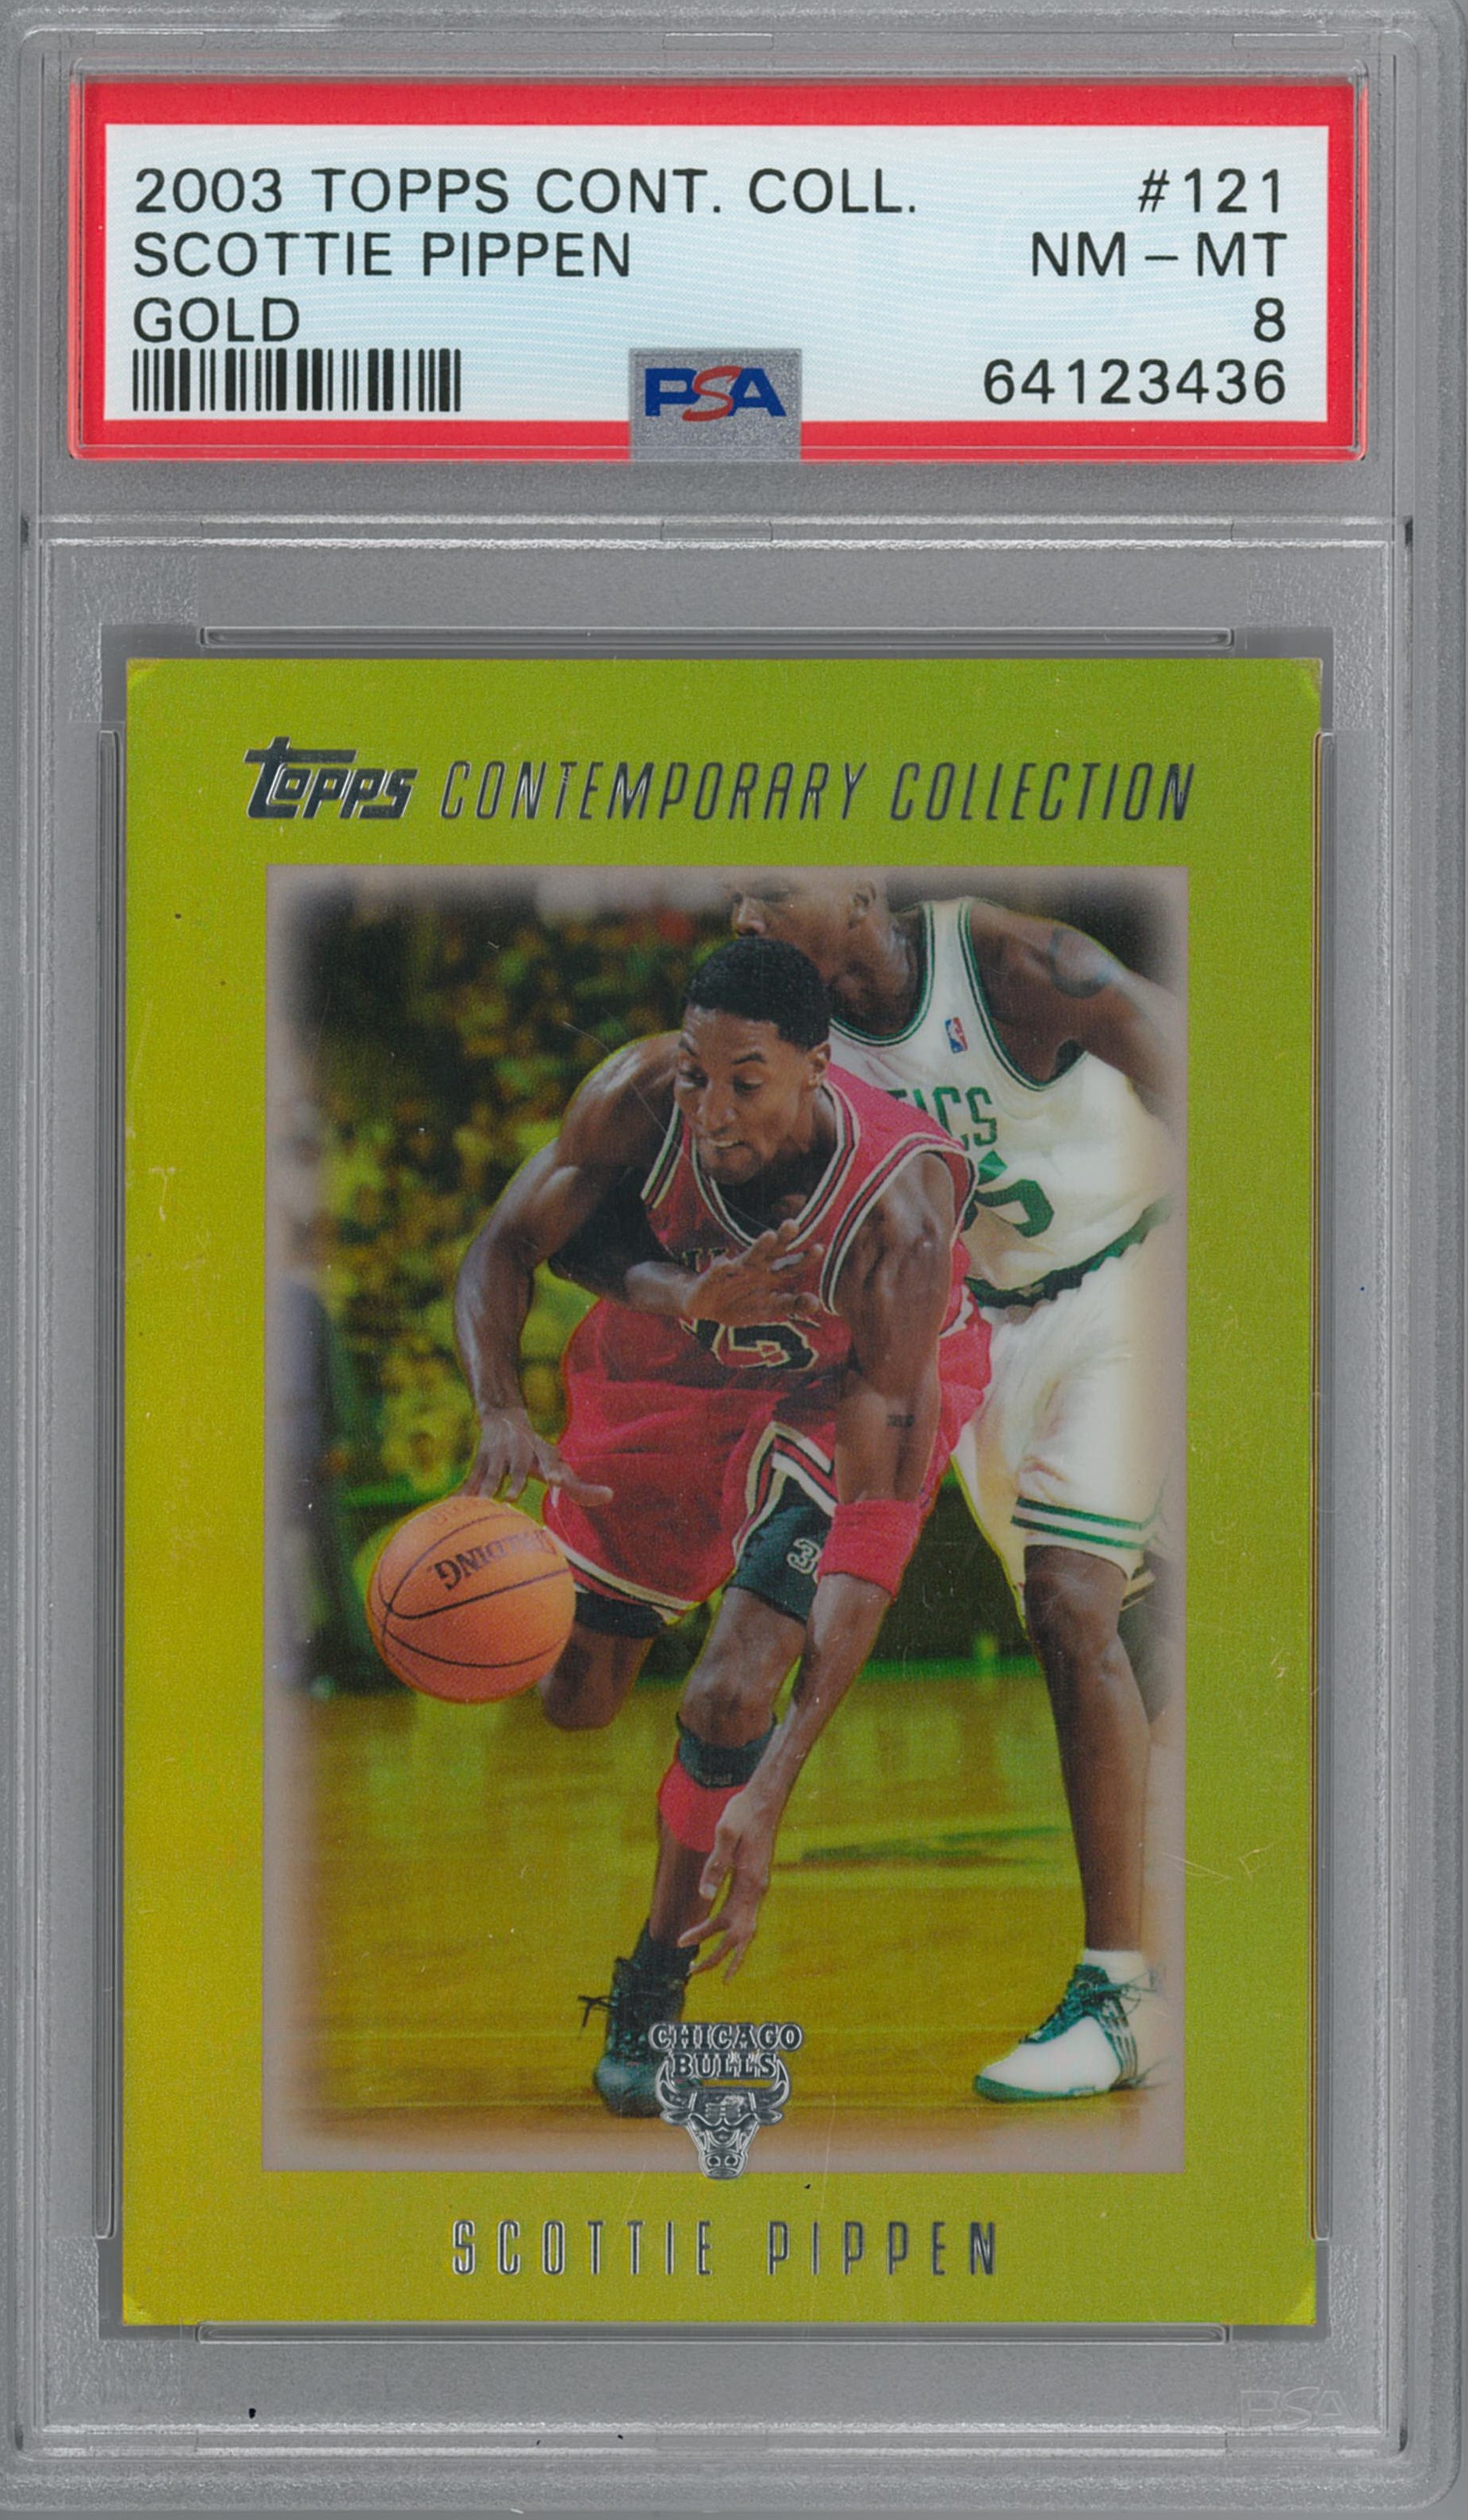 2003-04 Topps Contemporary Collection Gold 21of25.jpg